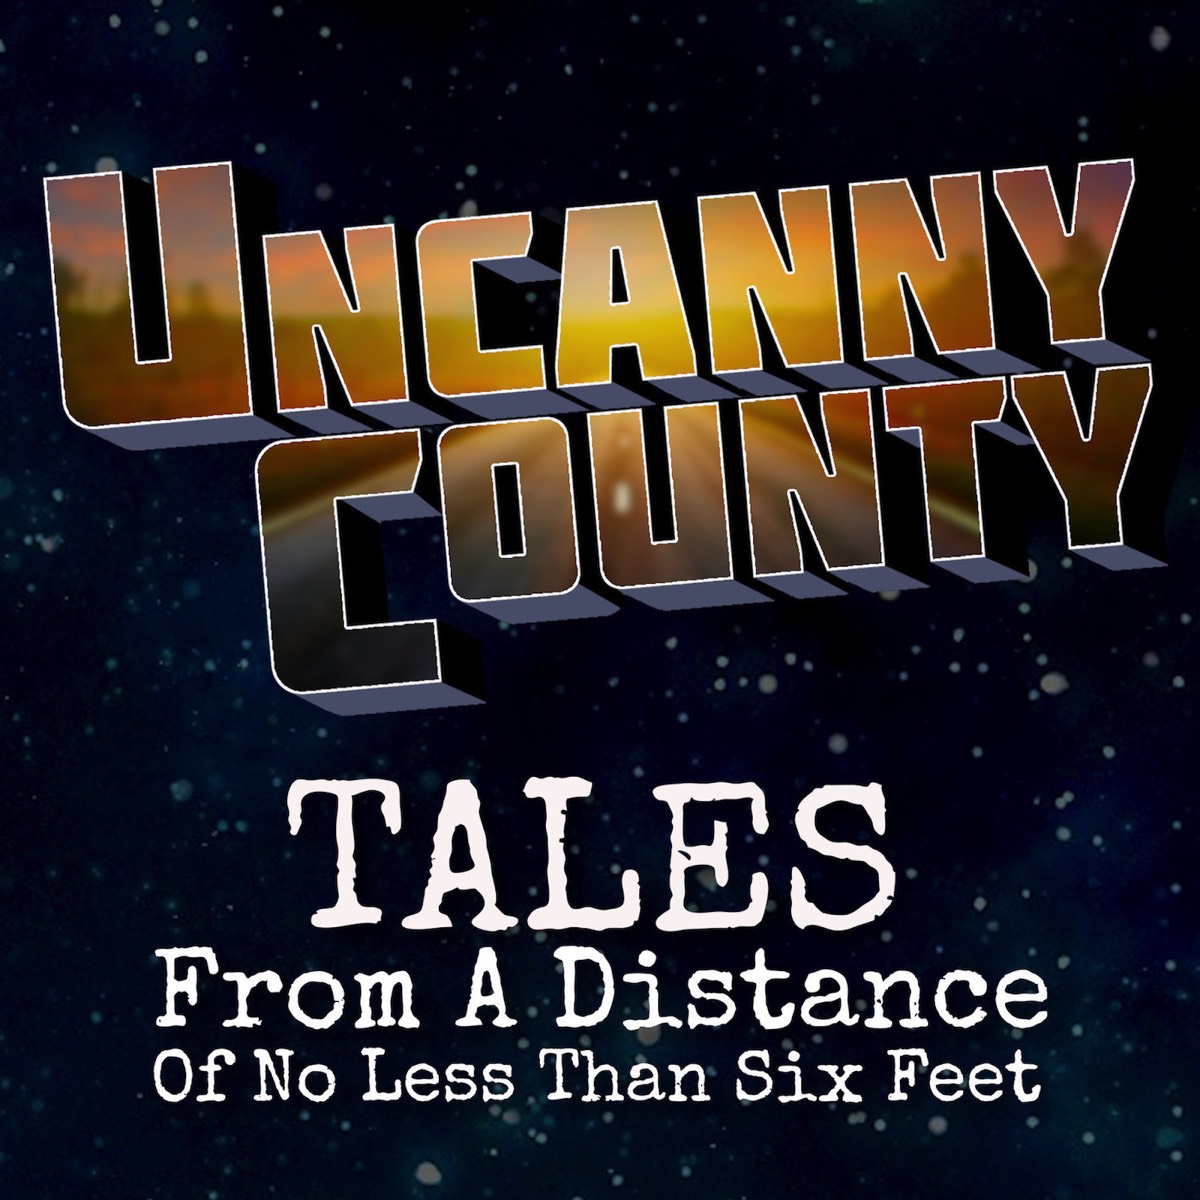 Uncanny County Mini-season checking in with County goings-on during voluntary quarantine